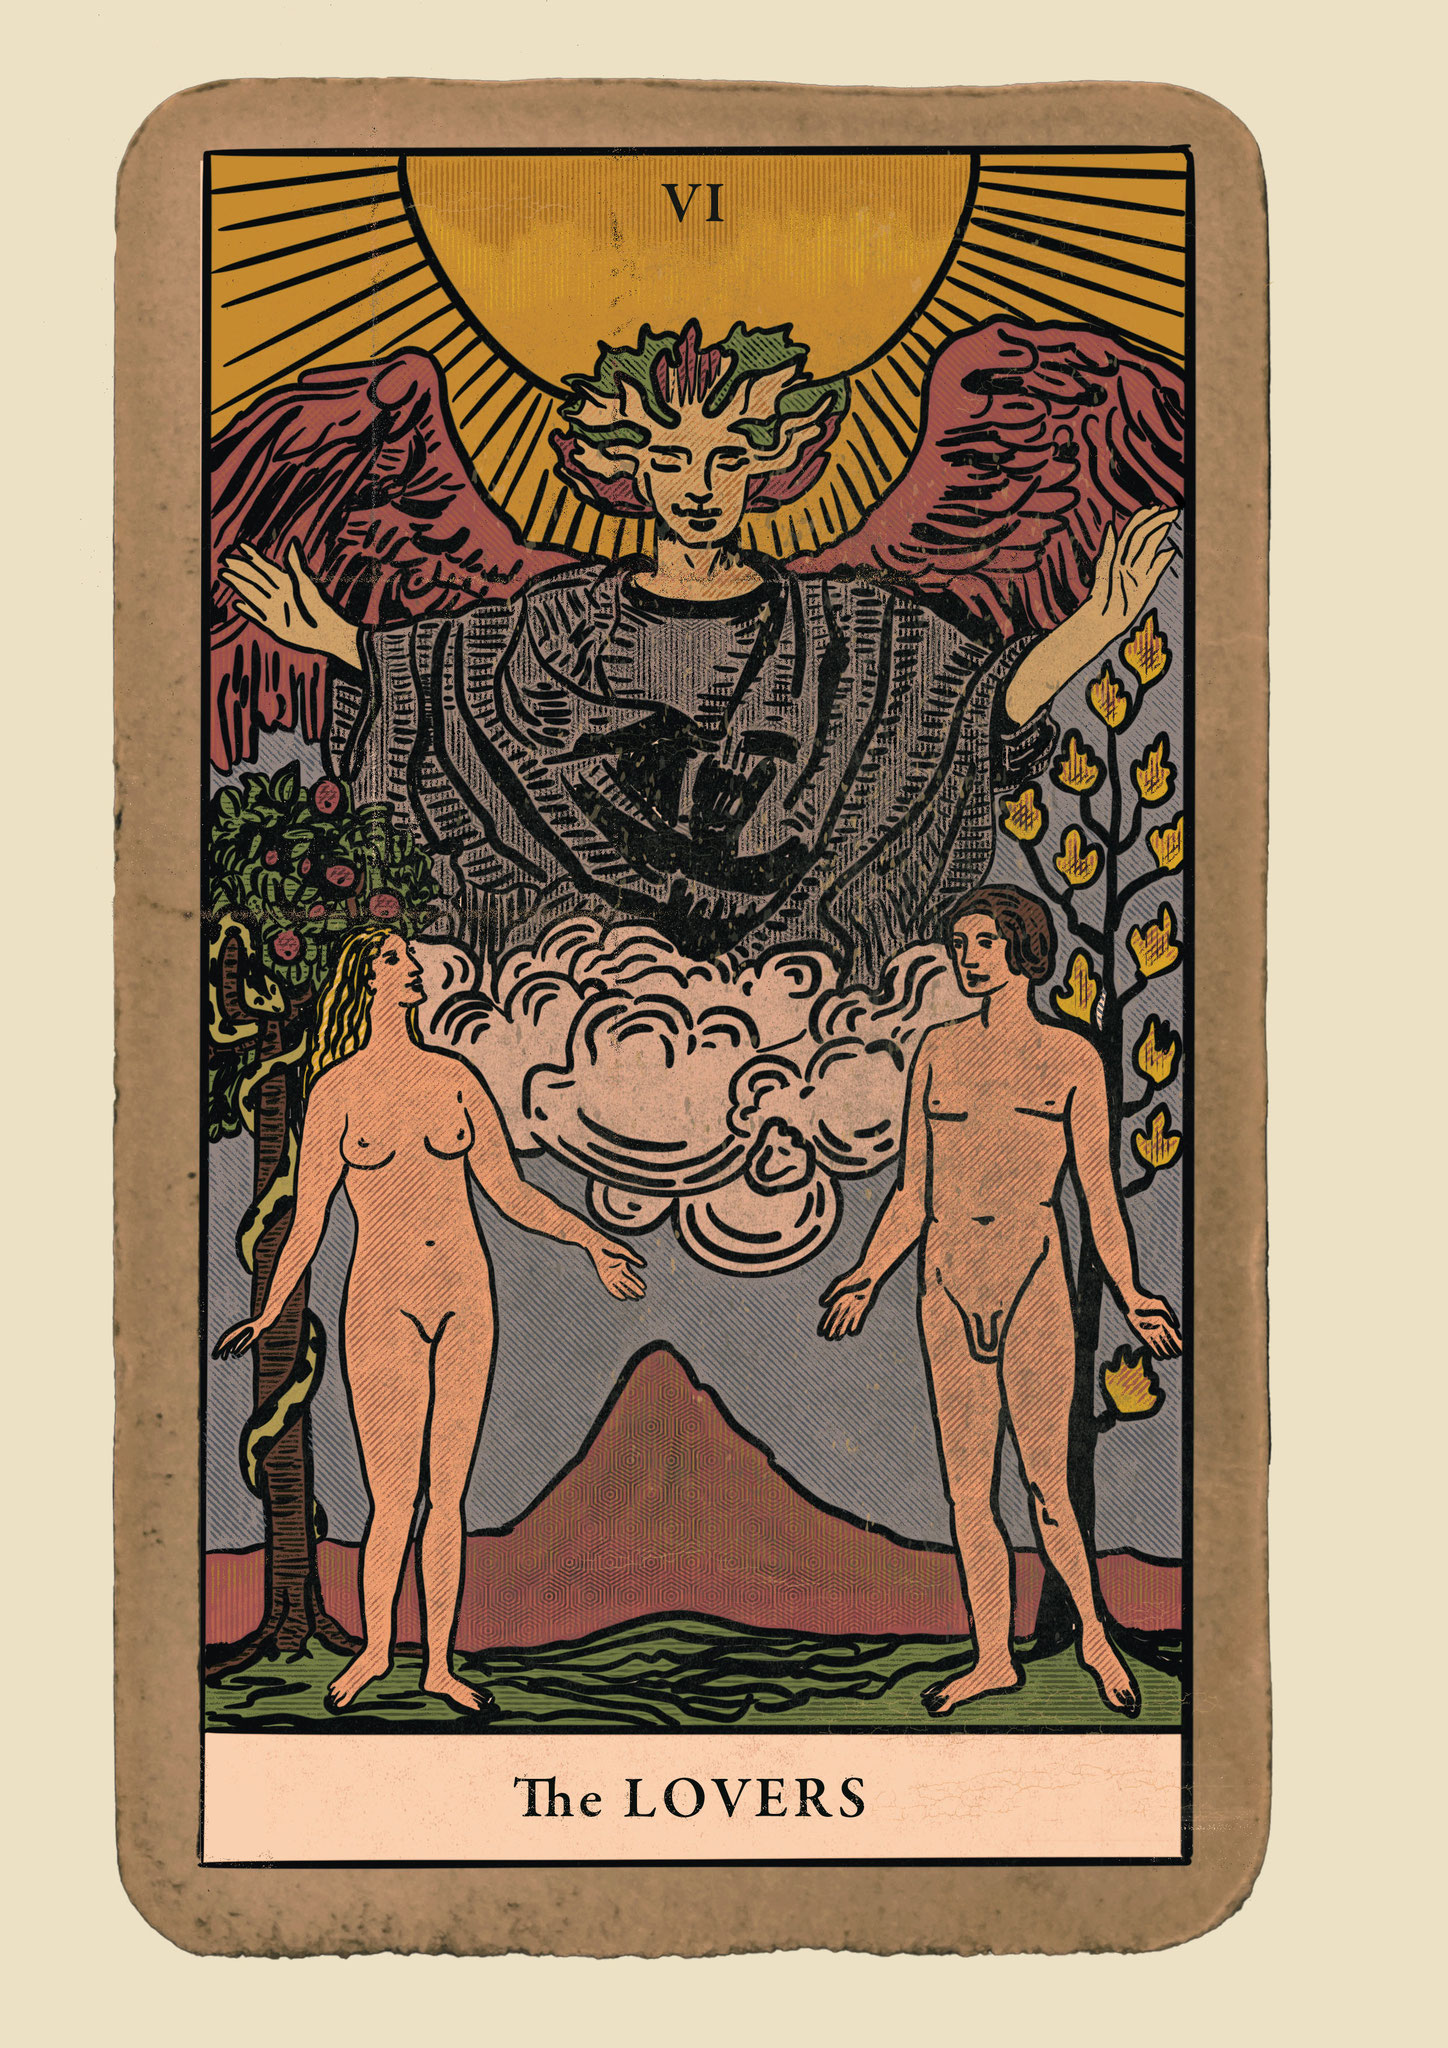 Recreation of a Tarot card after a painting by Pamela Colman Smith (public domain) / illustration and editing / ageing